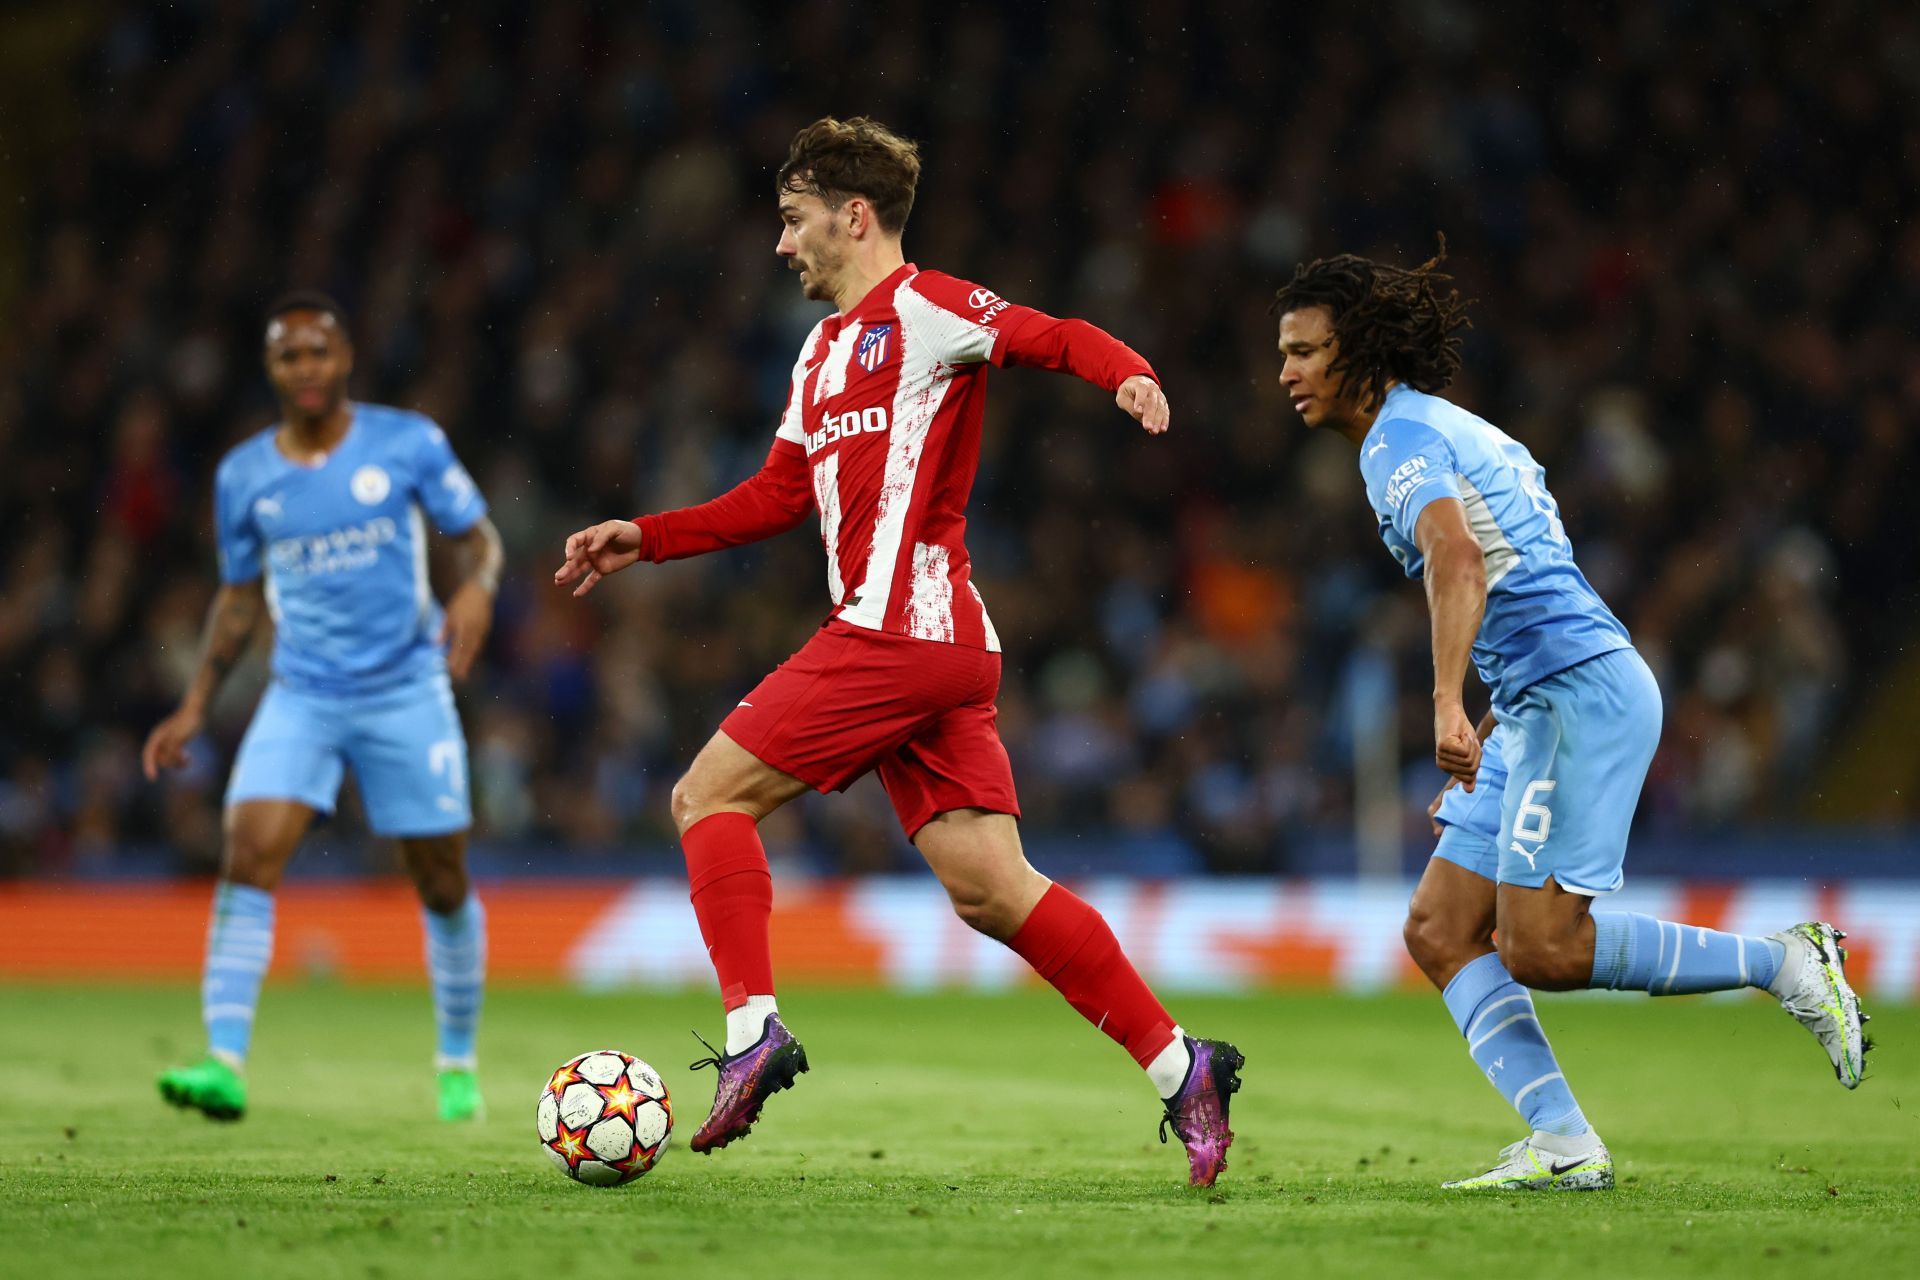 City will be wary of the likes of Griezmann on the counter